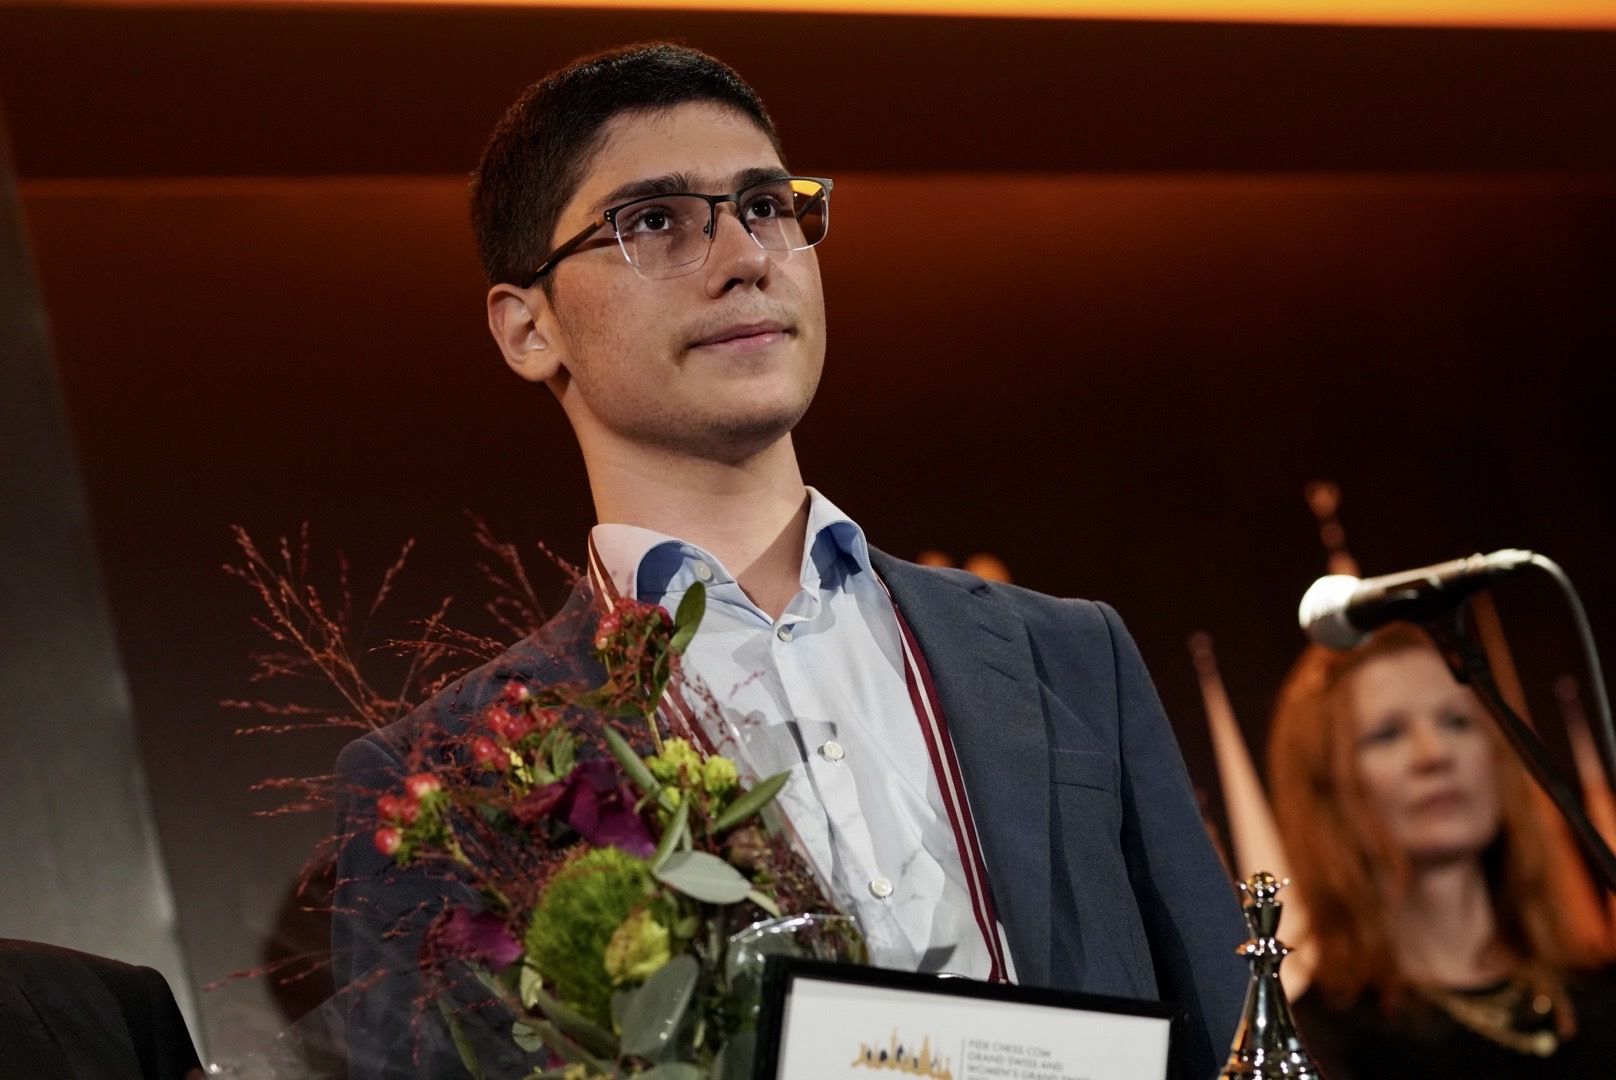 FIDE - International Chess Federation - Happy birthday to GM Alireza  Firouzja, who turns 19 today! 🎉🎂 The world #3 became a GM at the age of  14 and is the youngest